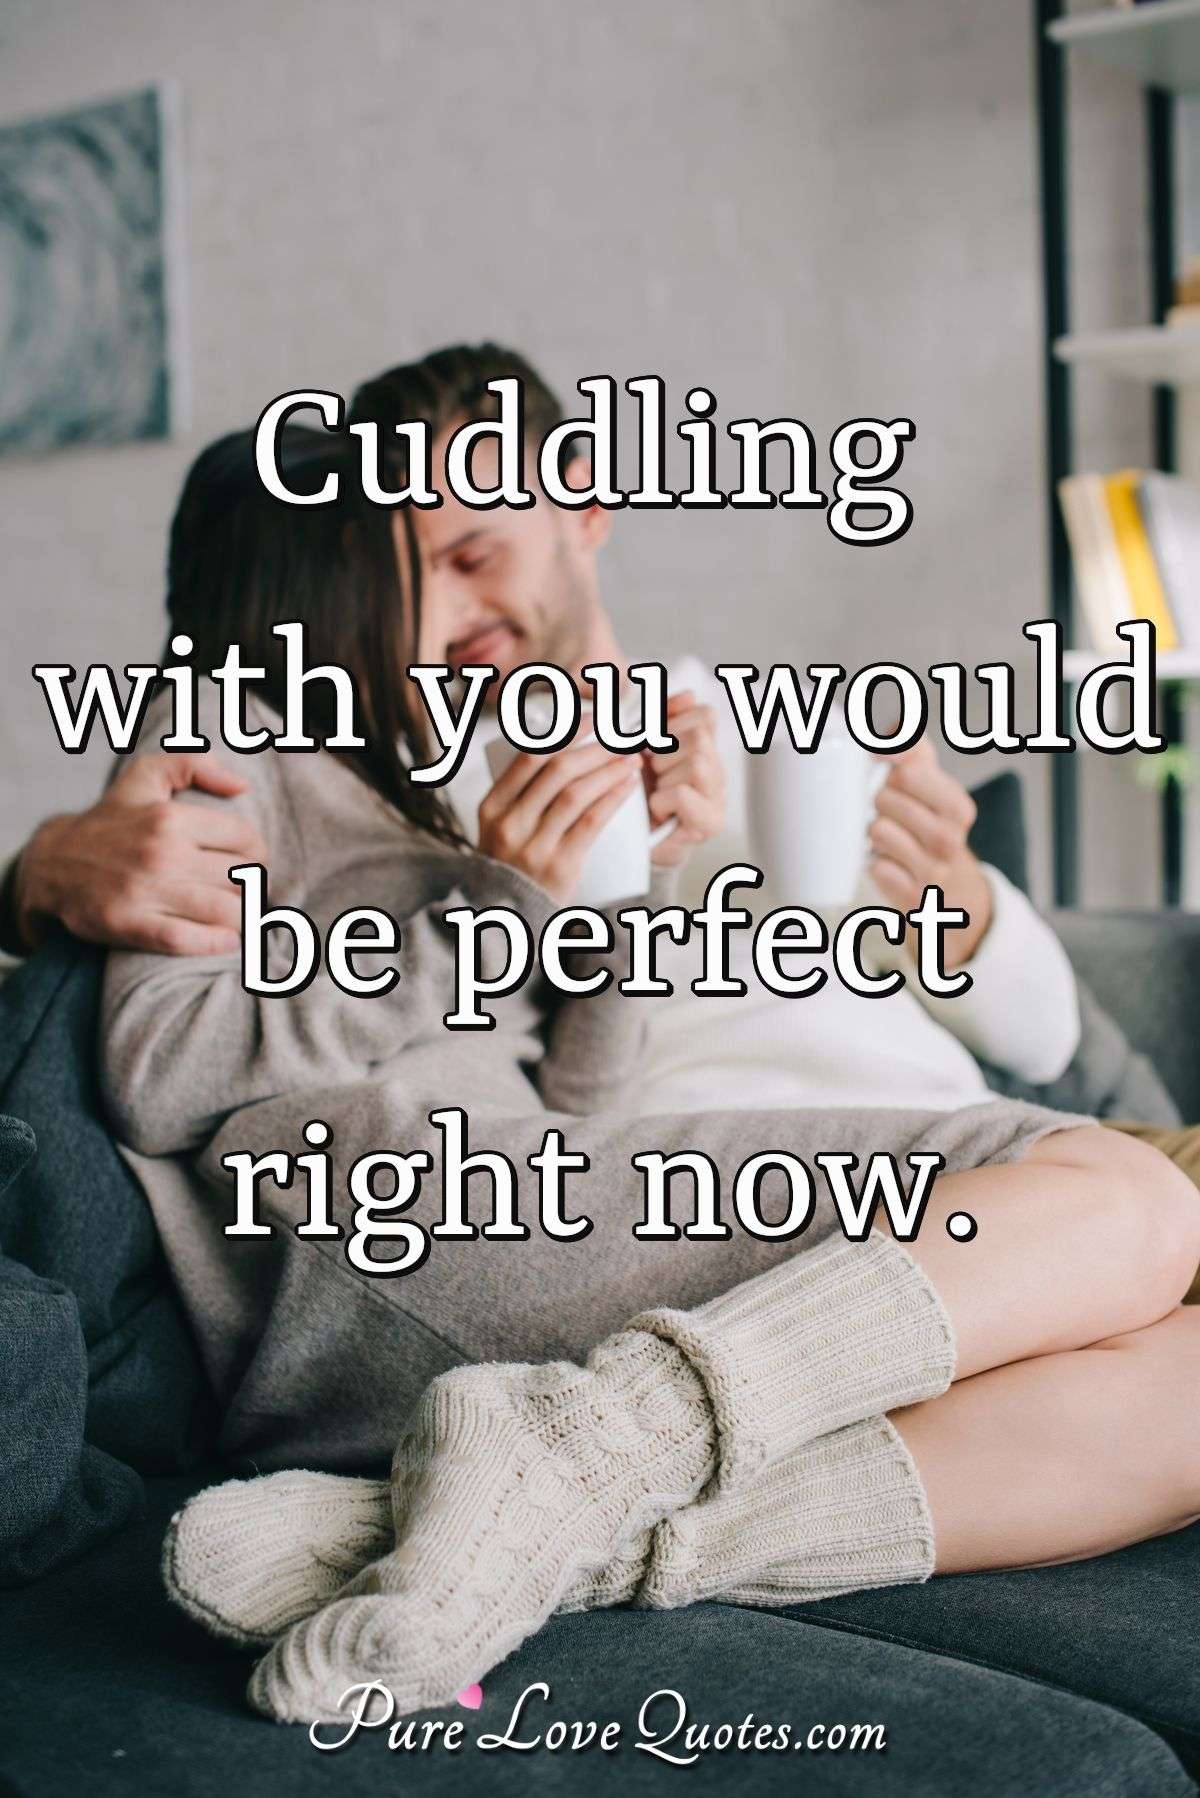 Cuddling with you would be perfect right now. - Anonymous